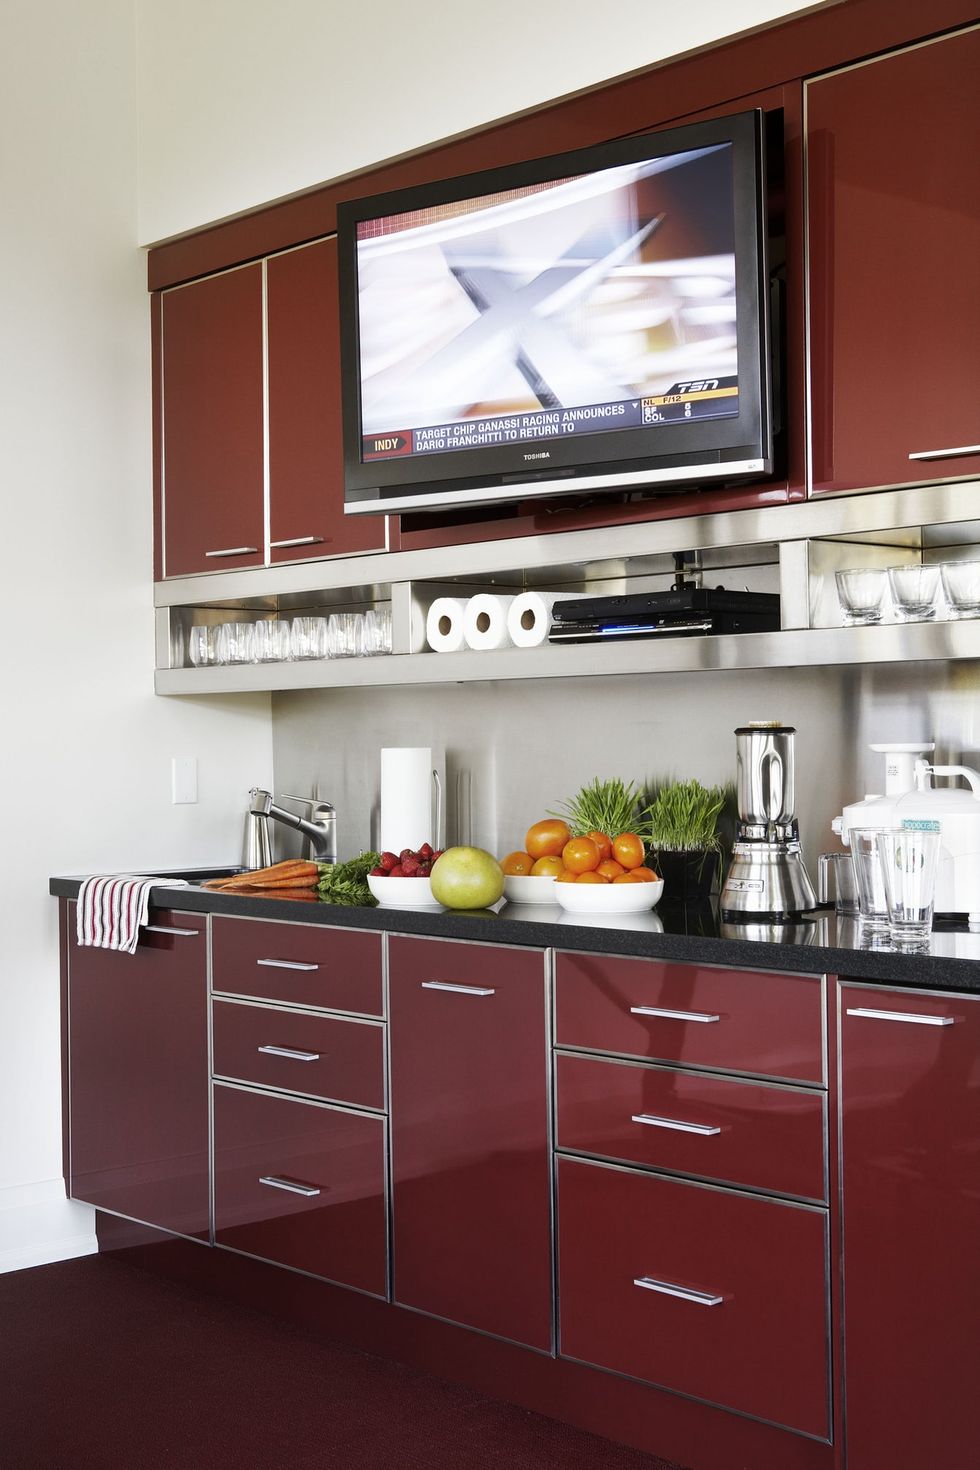 Modern red kitchen: how to furnish it